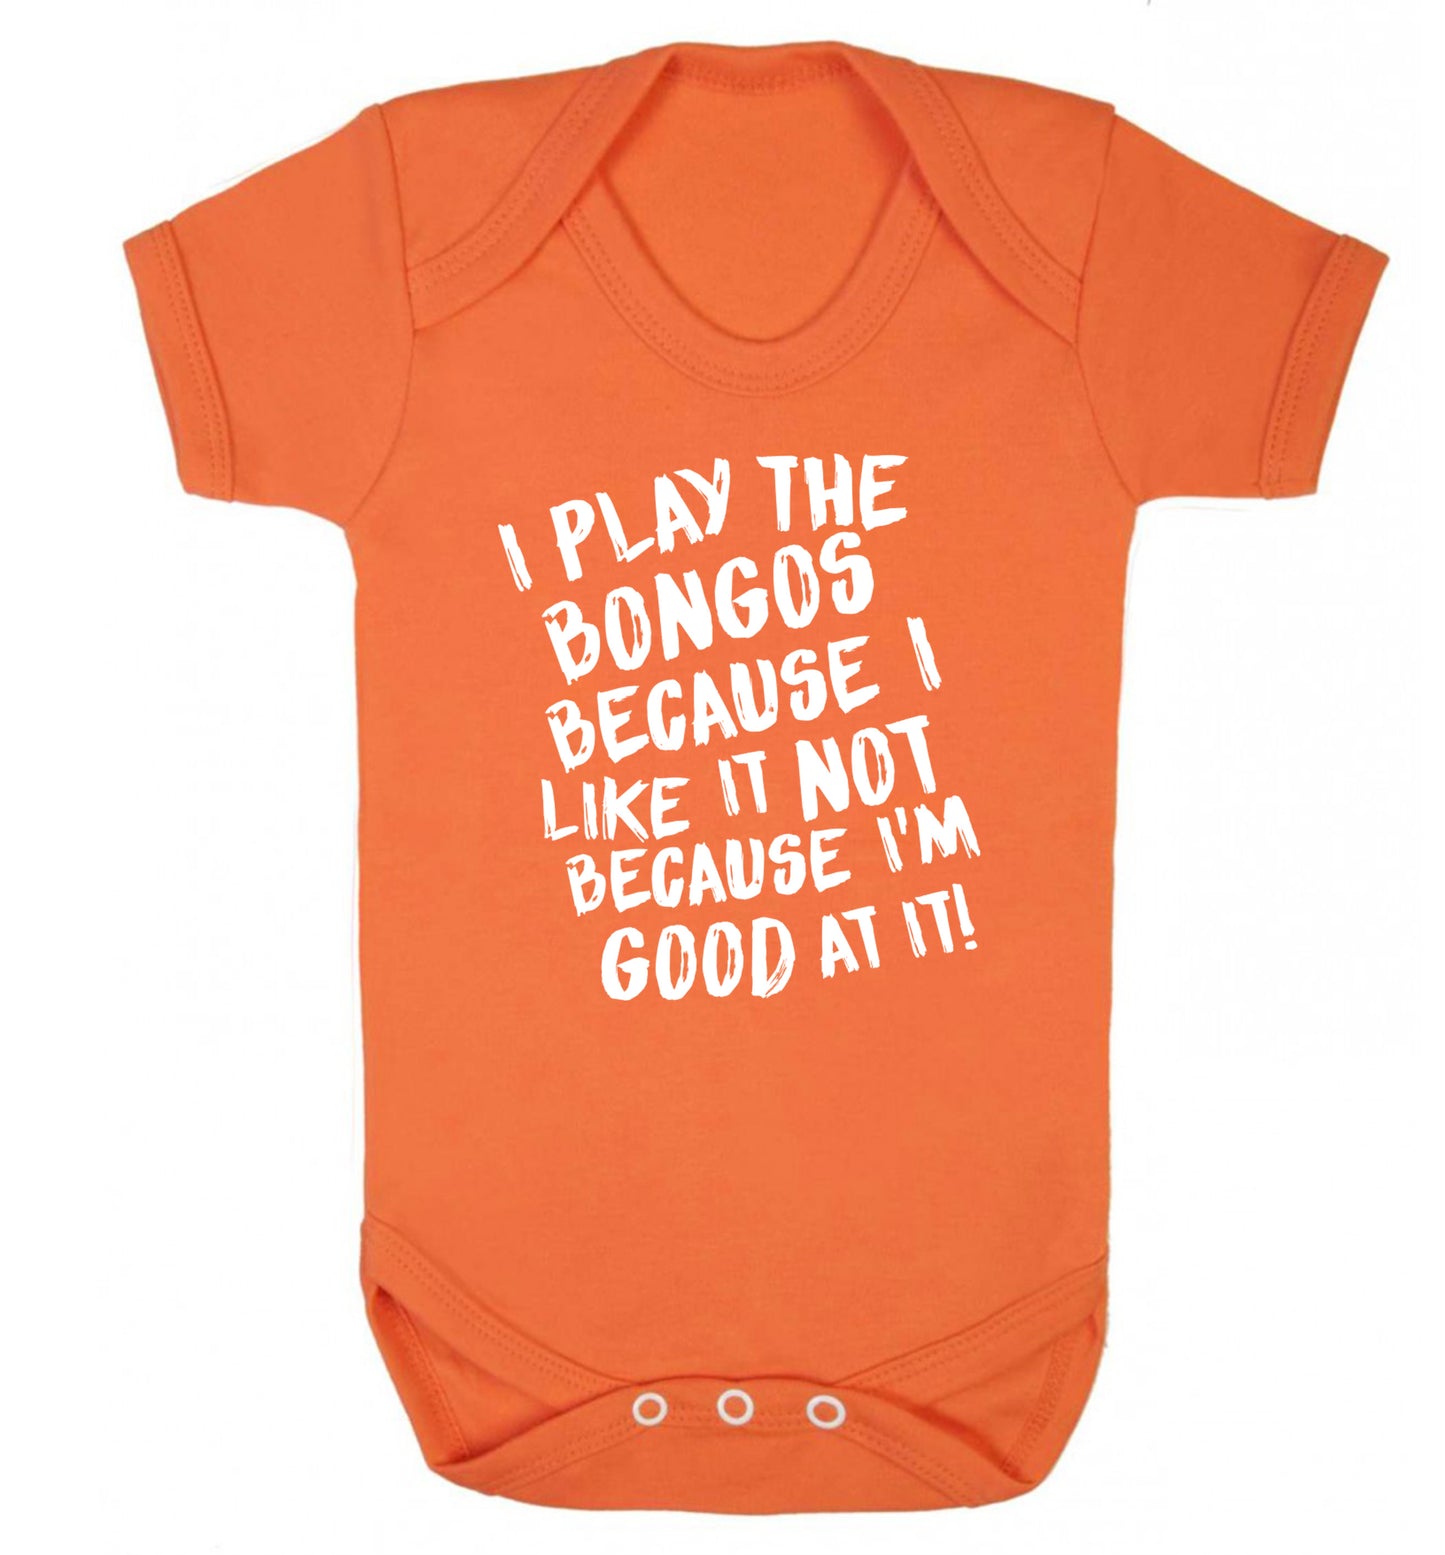 I play the bongos because I like it not because I'm good at it Baby Vest orange 18-24 months